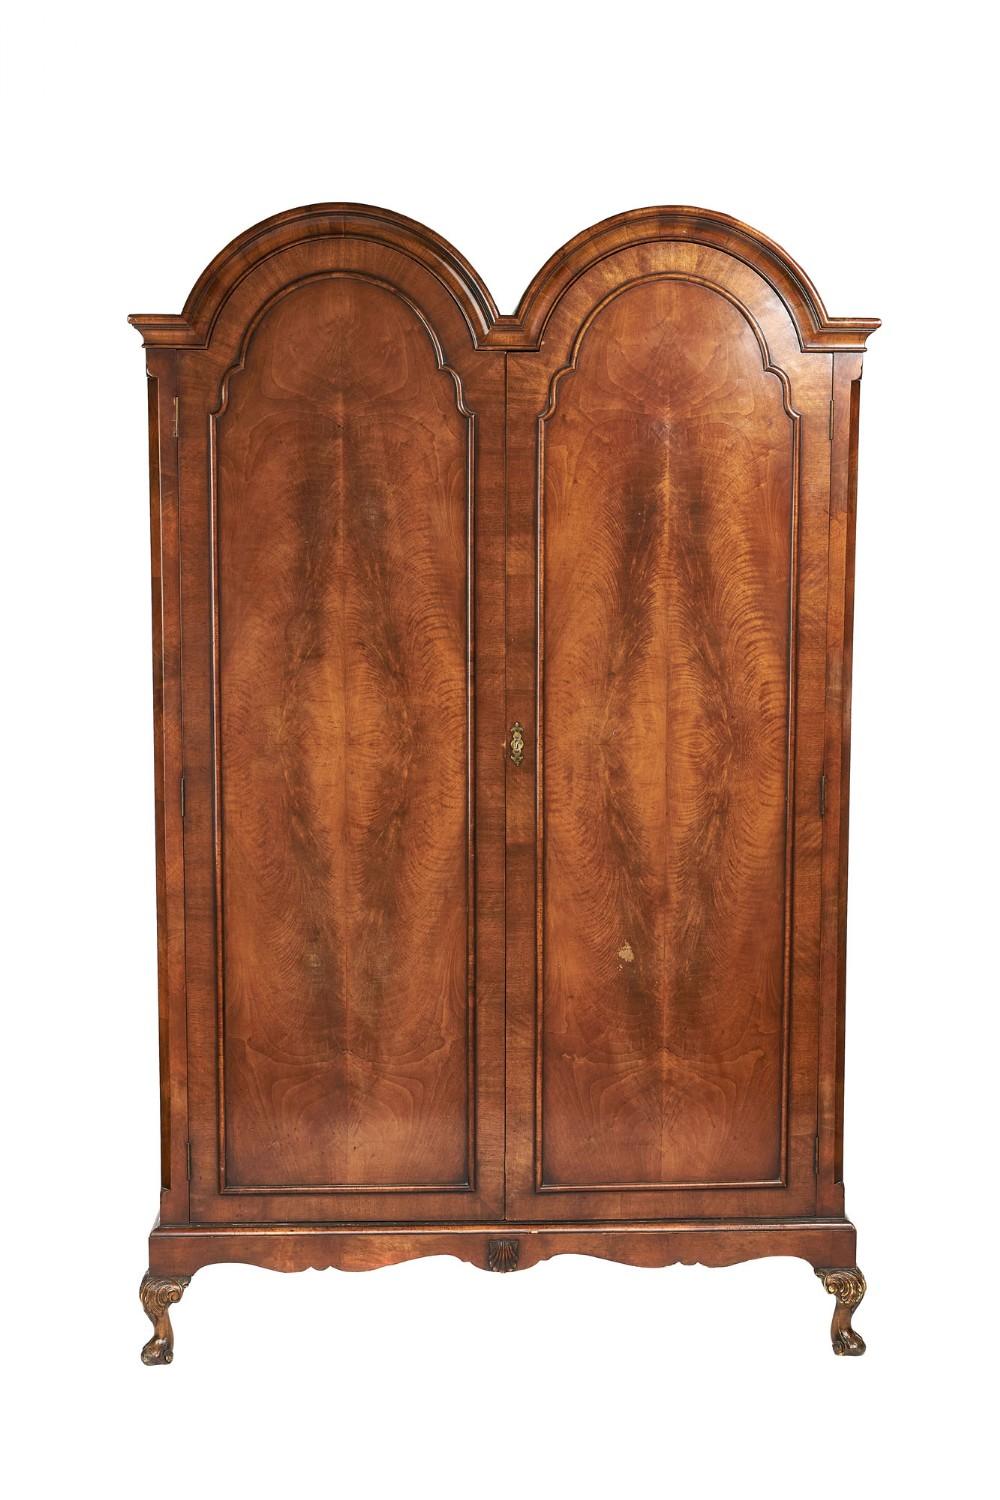 Antique quality burr walnut two door double dome wardrobe having a quality double dome shaped moulded cornice above a pair of crossbanded burr walnut shaped moulded doors opening to reveal a large hanging storage compartment. It boasts canted